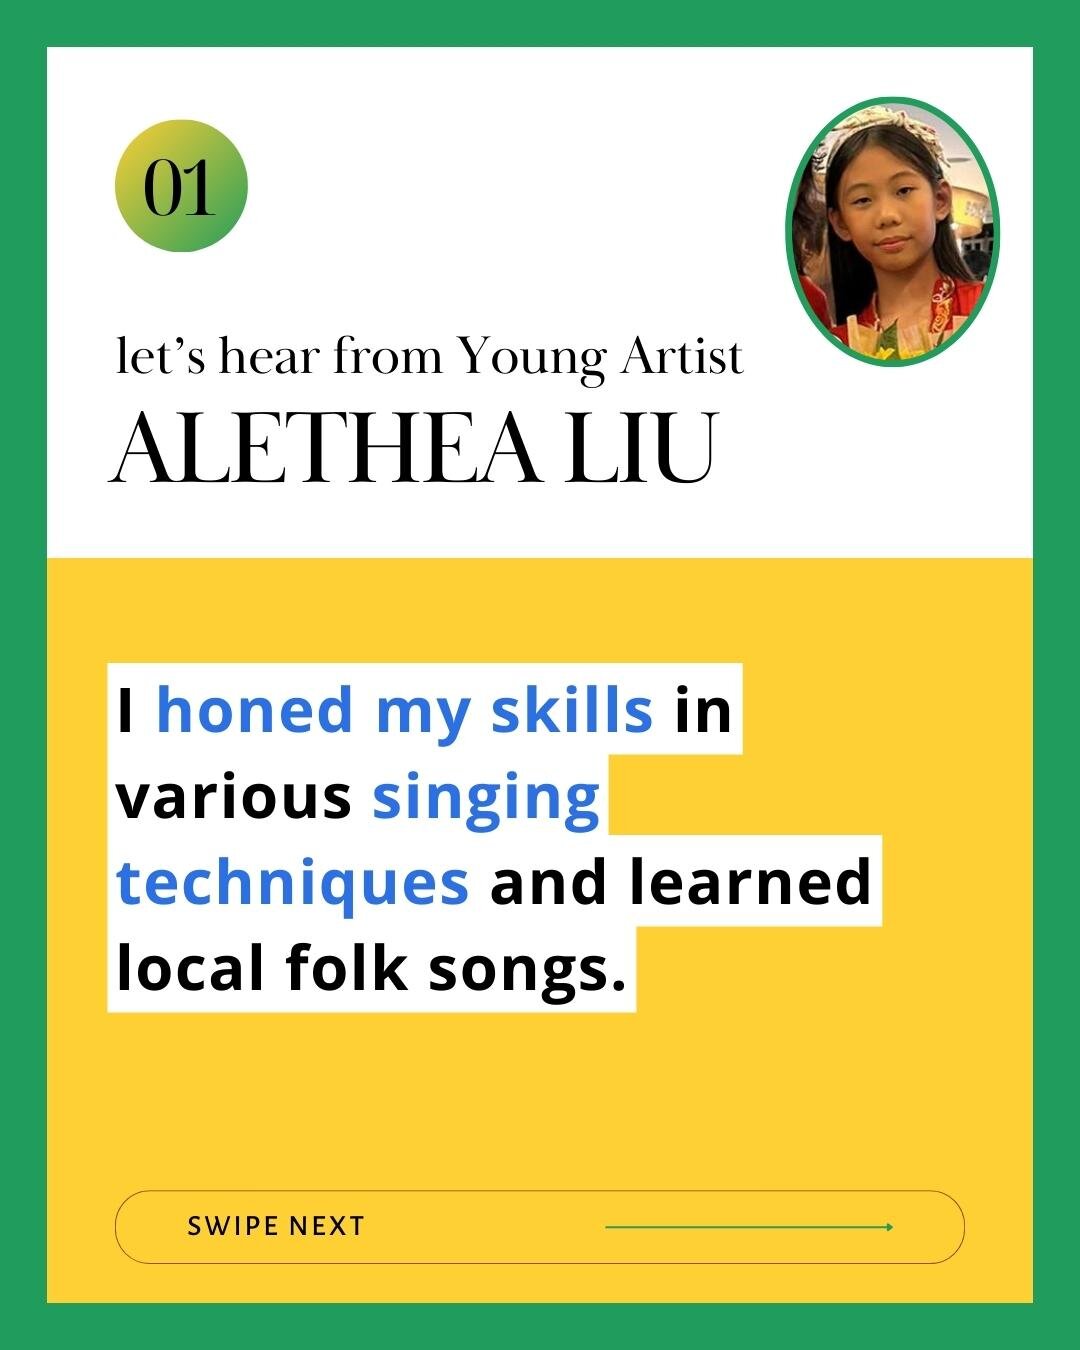 Let's hear from another Young Artist - Alethea Liu! She sang with us in our ROOTS Concert in September, performing an arrangement of Singapura in Malay with other Young Artists and members of The ROS Singers. We really enjoyed singing with her!

The 